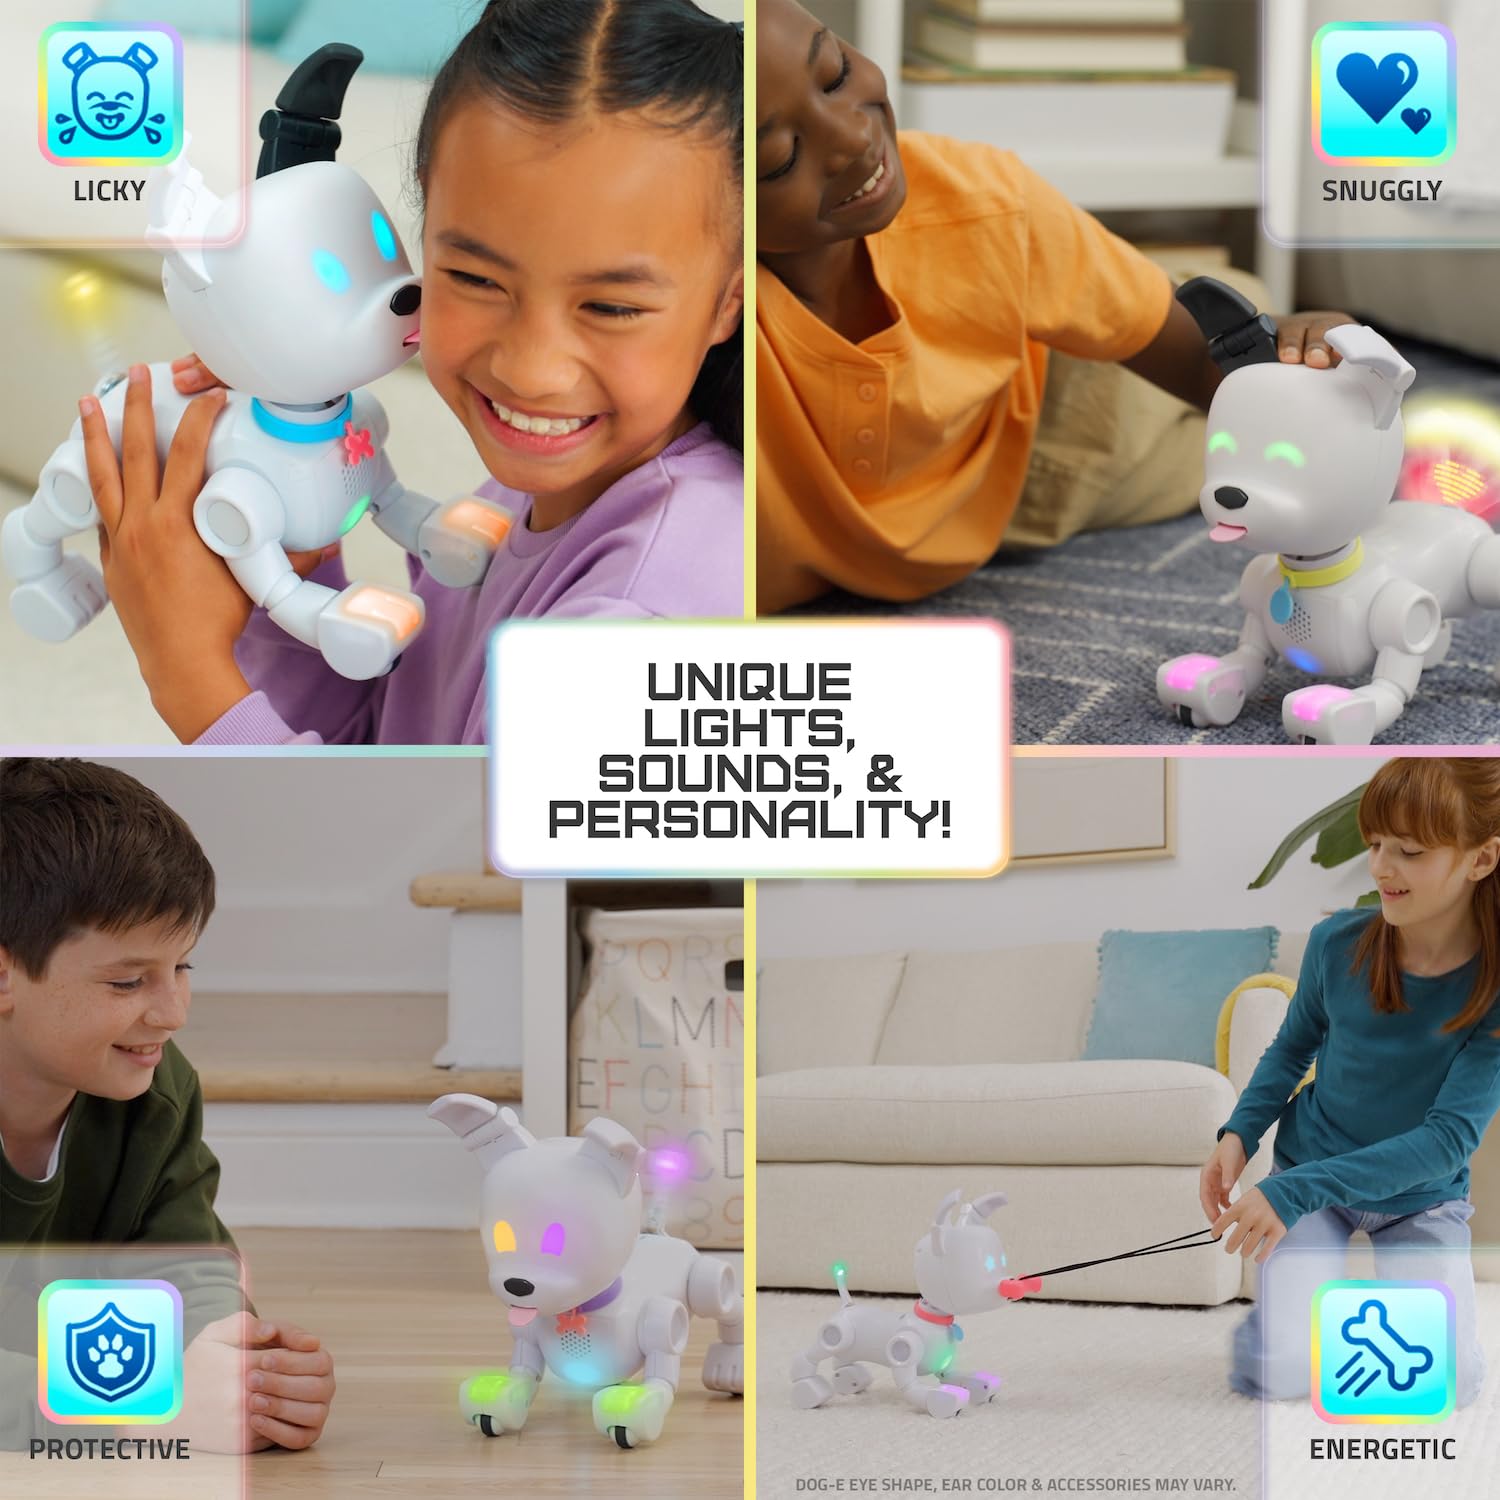 DOG-E by MINTiD Interactive Robot Dog with Colorful LED Lights, 200+ Sounds & Reactions, App Connected (Ages 6+)